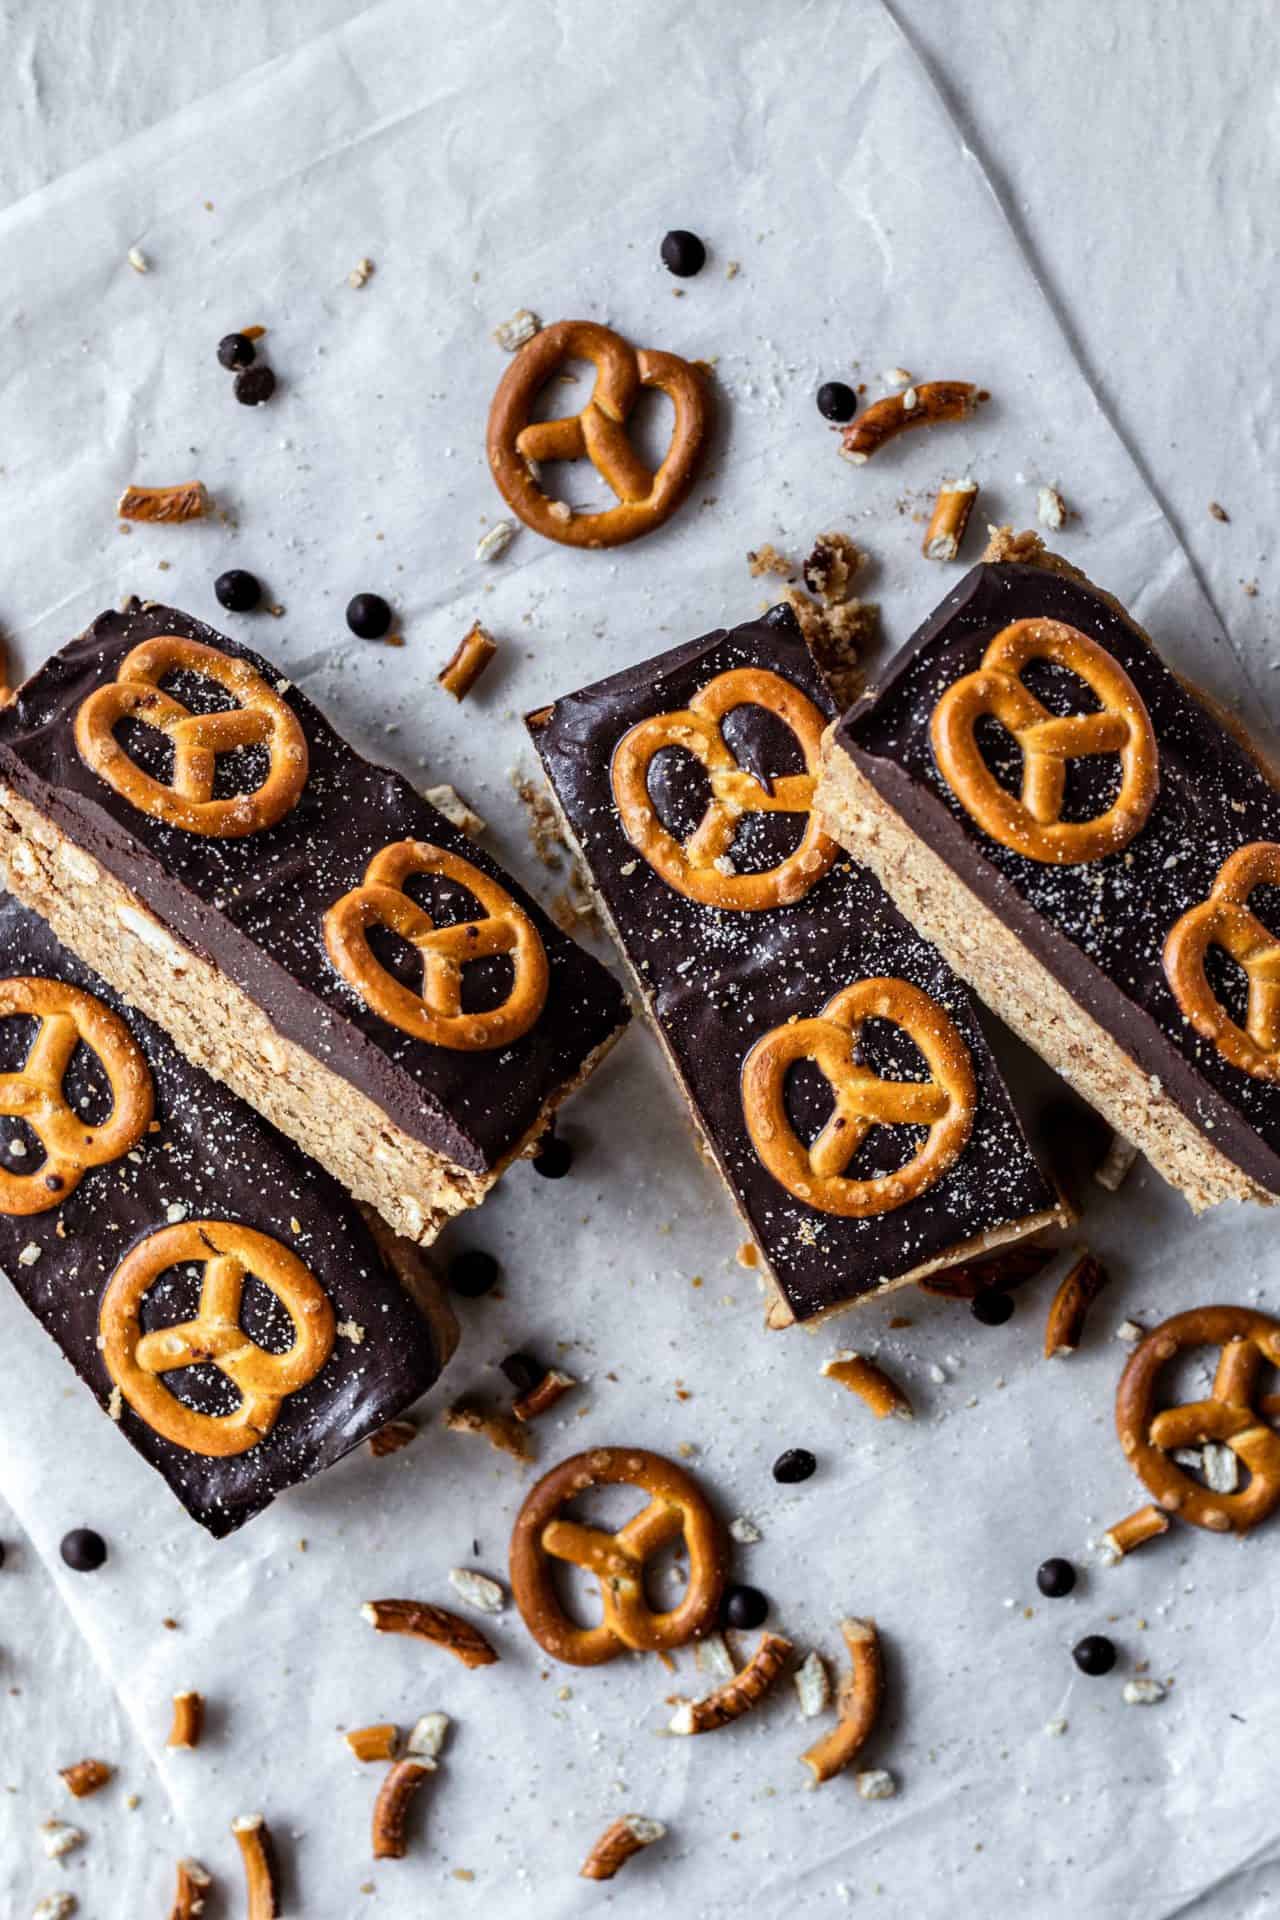 These Vegan Chocolate Pretzel Bars are perfectly sweetened, slightly crunchy, chocolaty and the best part refined sugar-free and healthy!